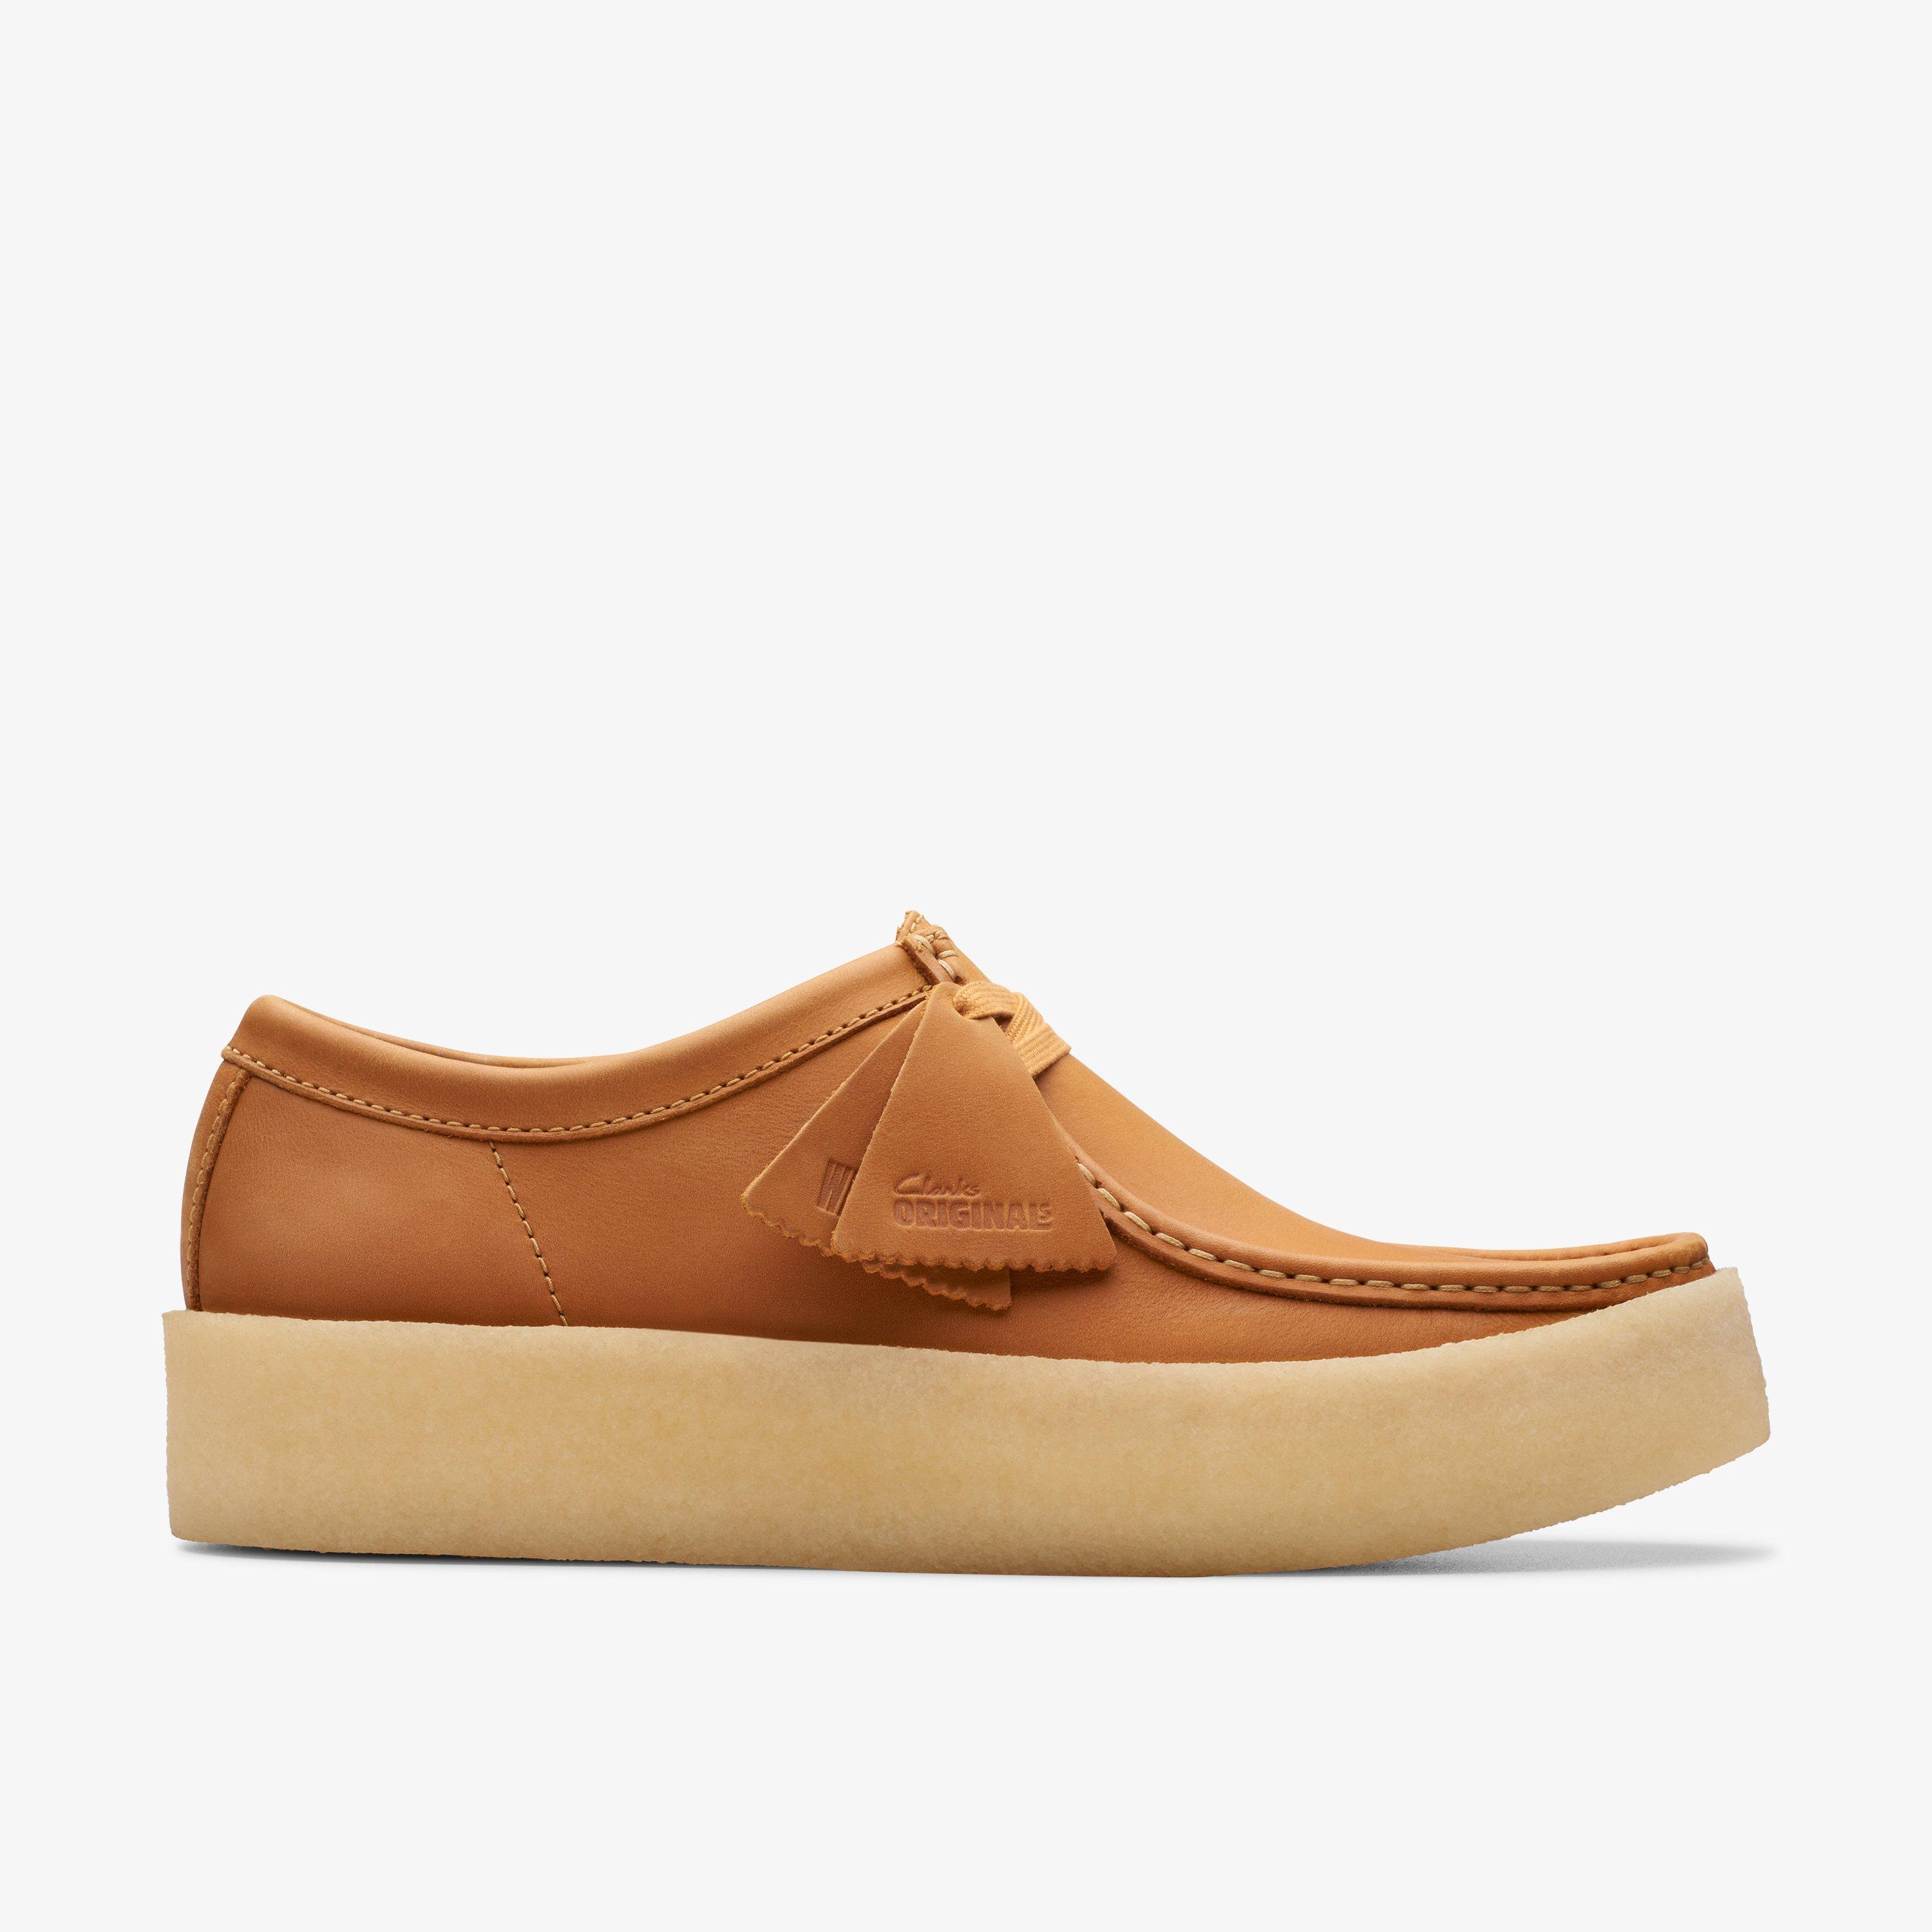 Size 12 Clarks Originals Wallabee Cup Mid Tan Leather shoes